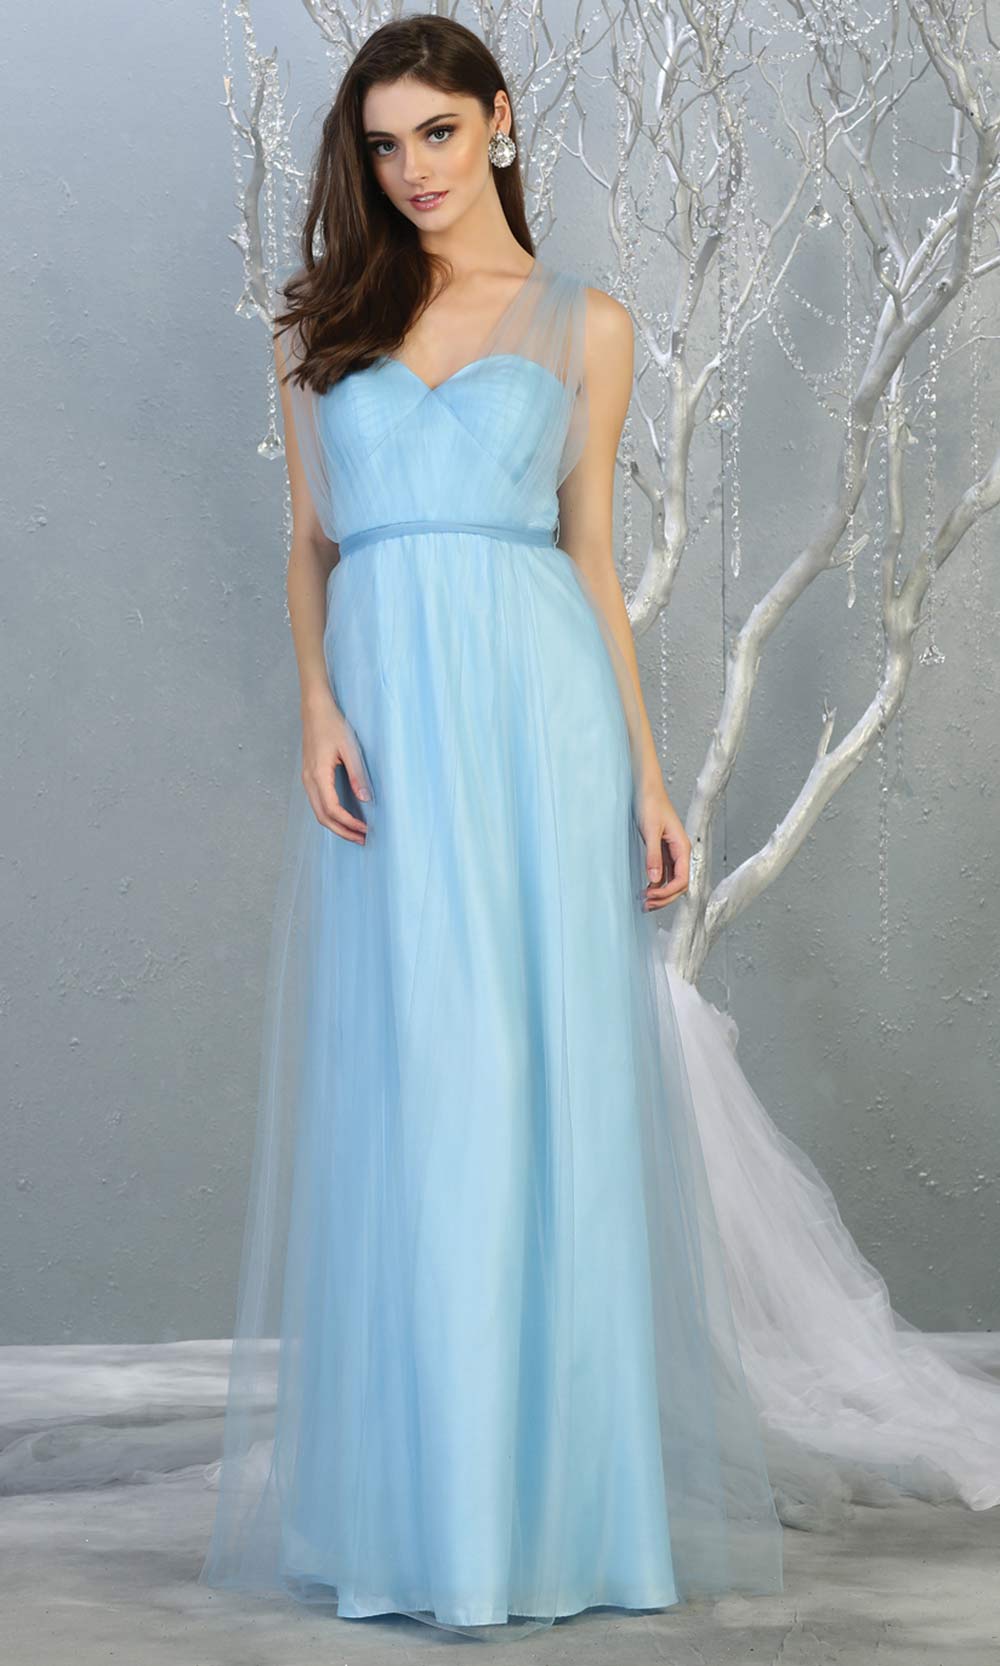 Mayqueen MQ1728 long perry blue flowy tulle mesh dress.Light blue evening dress is perfect for bridesmaid dresses,formal wedding guest party dress.This multiway convertible tulle dress allows you to wear a dress w/different necklines.Plus sizes avai.jpg